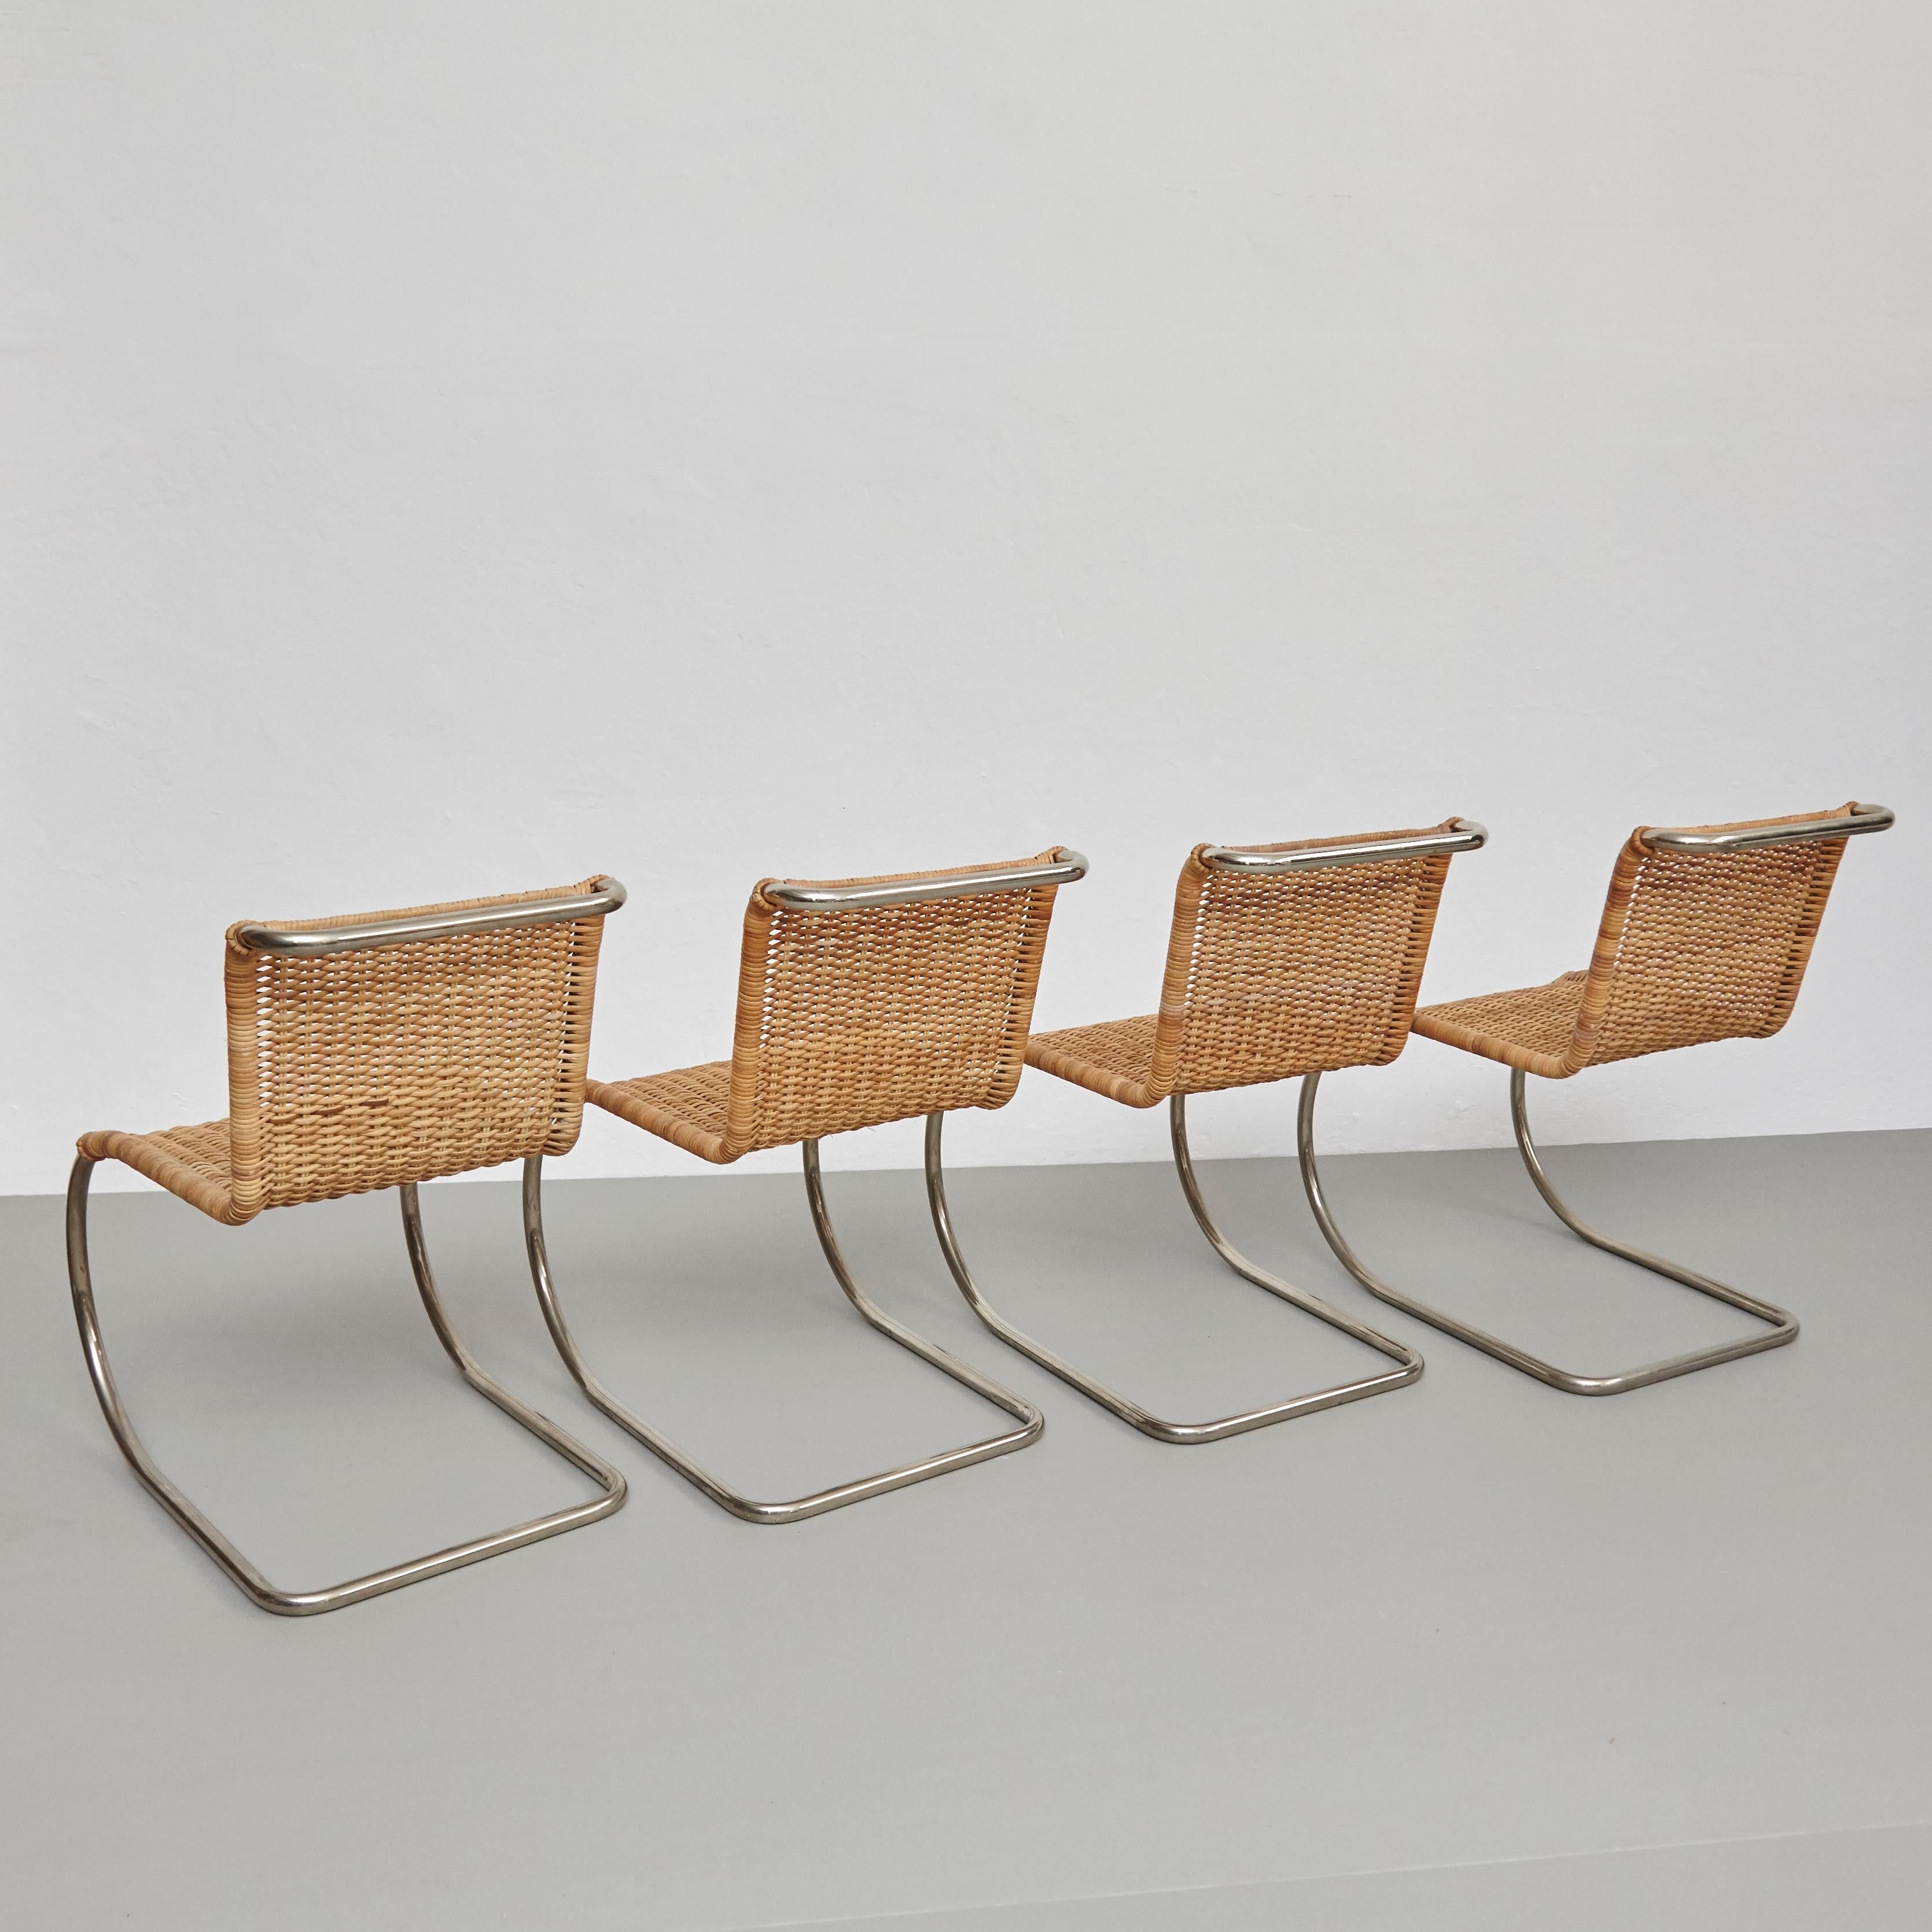 Set of 4 MR10 chairs designed by Ludwig Mies van der Rohe in 1927.
Manufactured by Tecta, circa 1960. Germany

Inspired by the chairs of Marcel Breuer, Ludwig Mies van der Rohe replaced the right angles on the front legs with a graceful curve